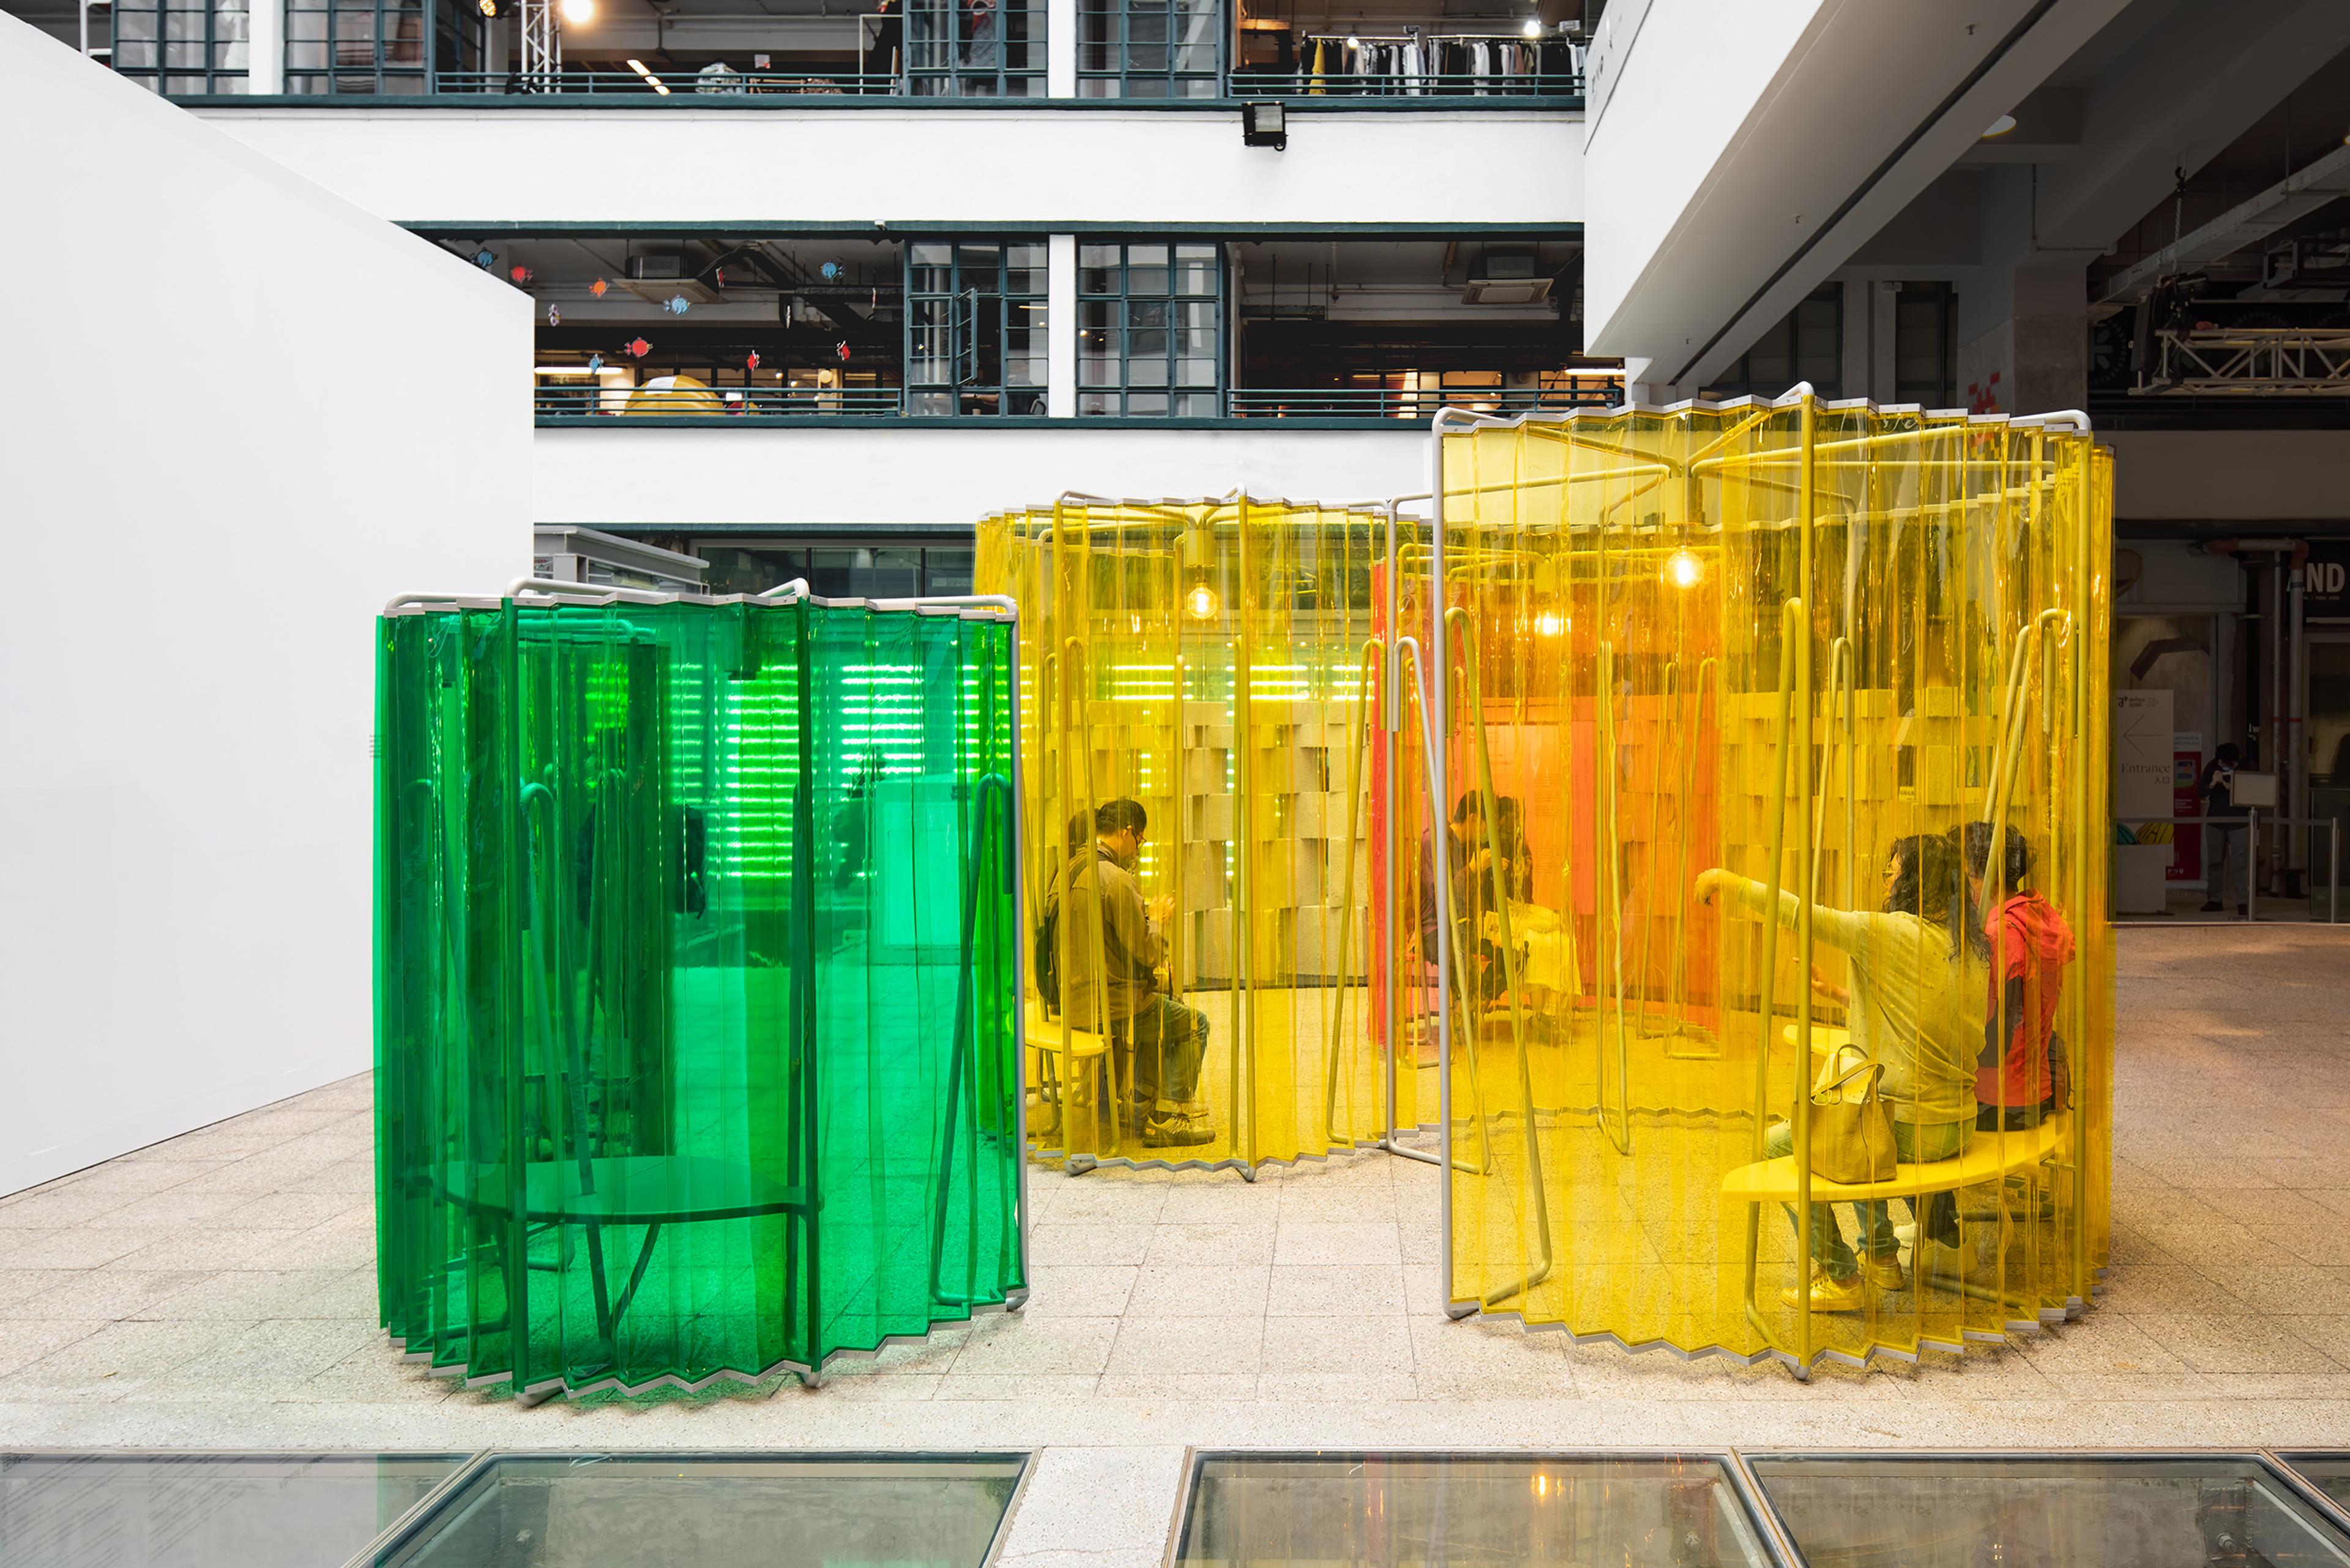 colorful installation inside building courtyard